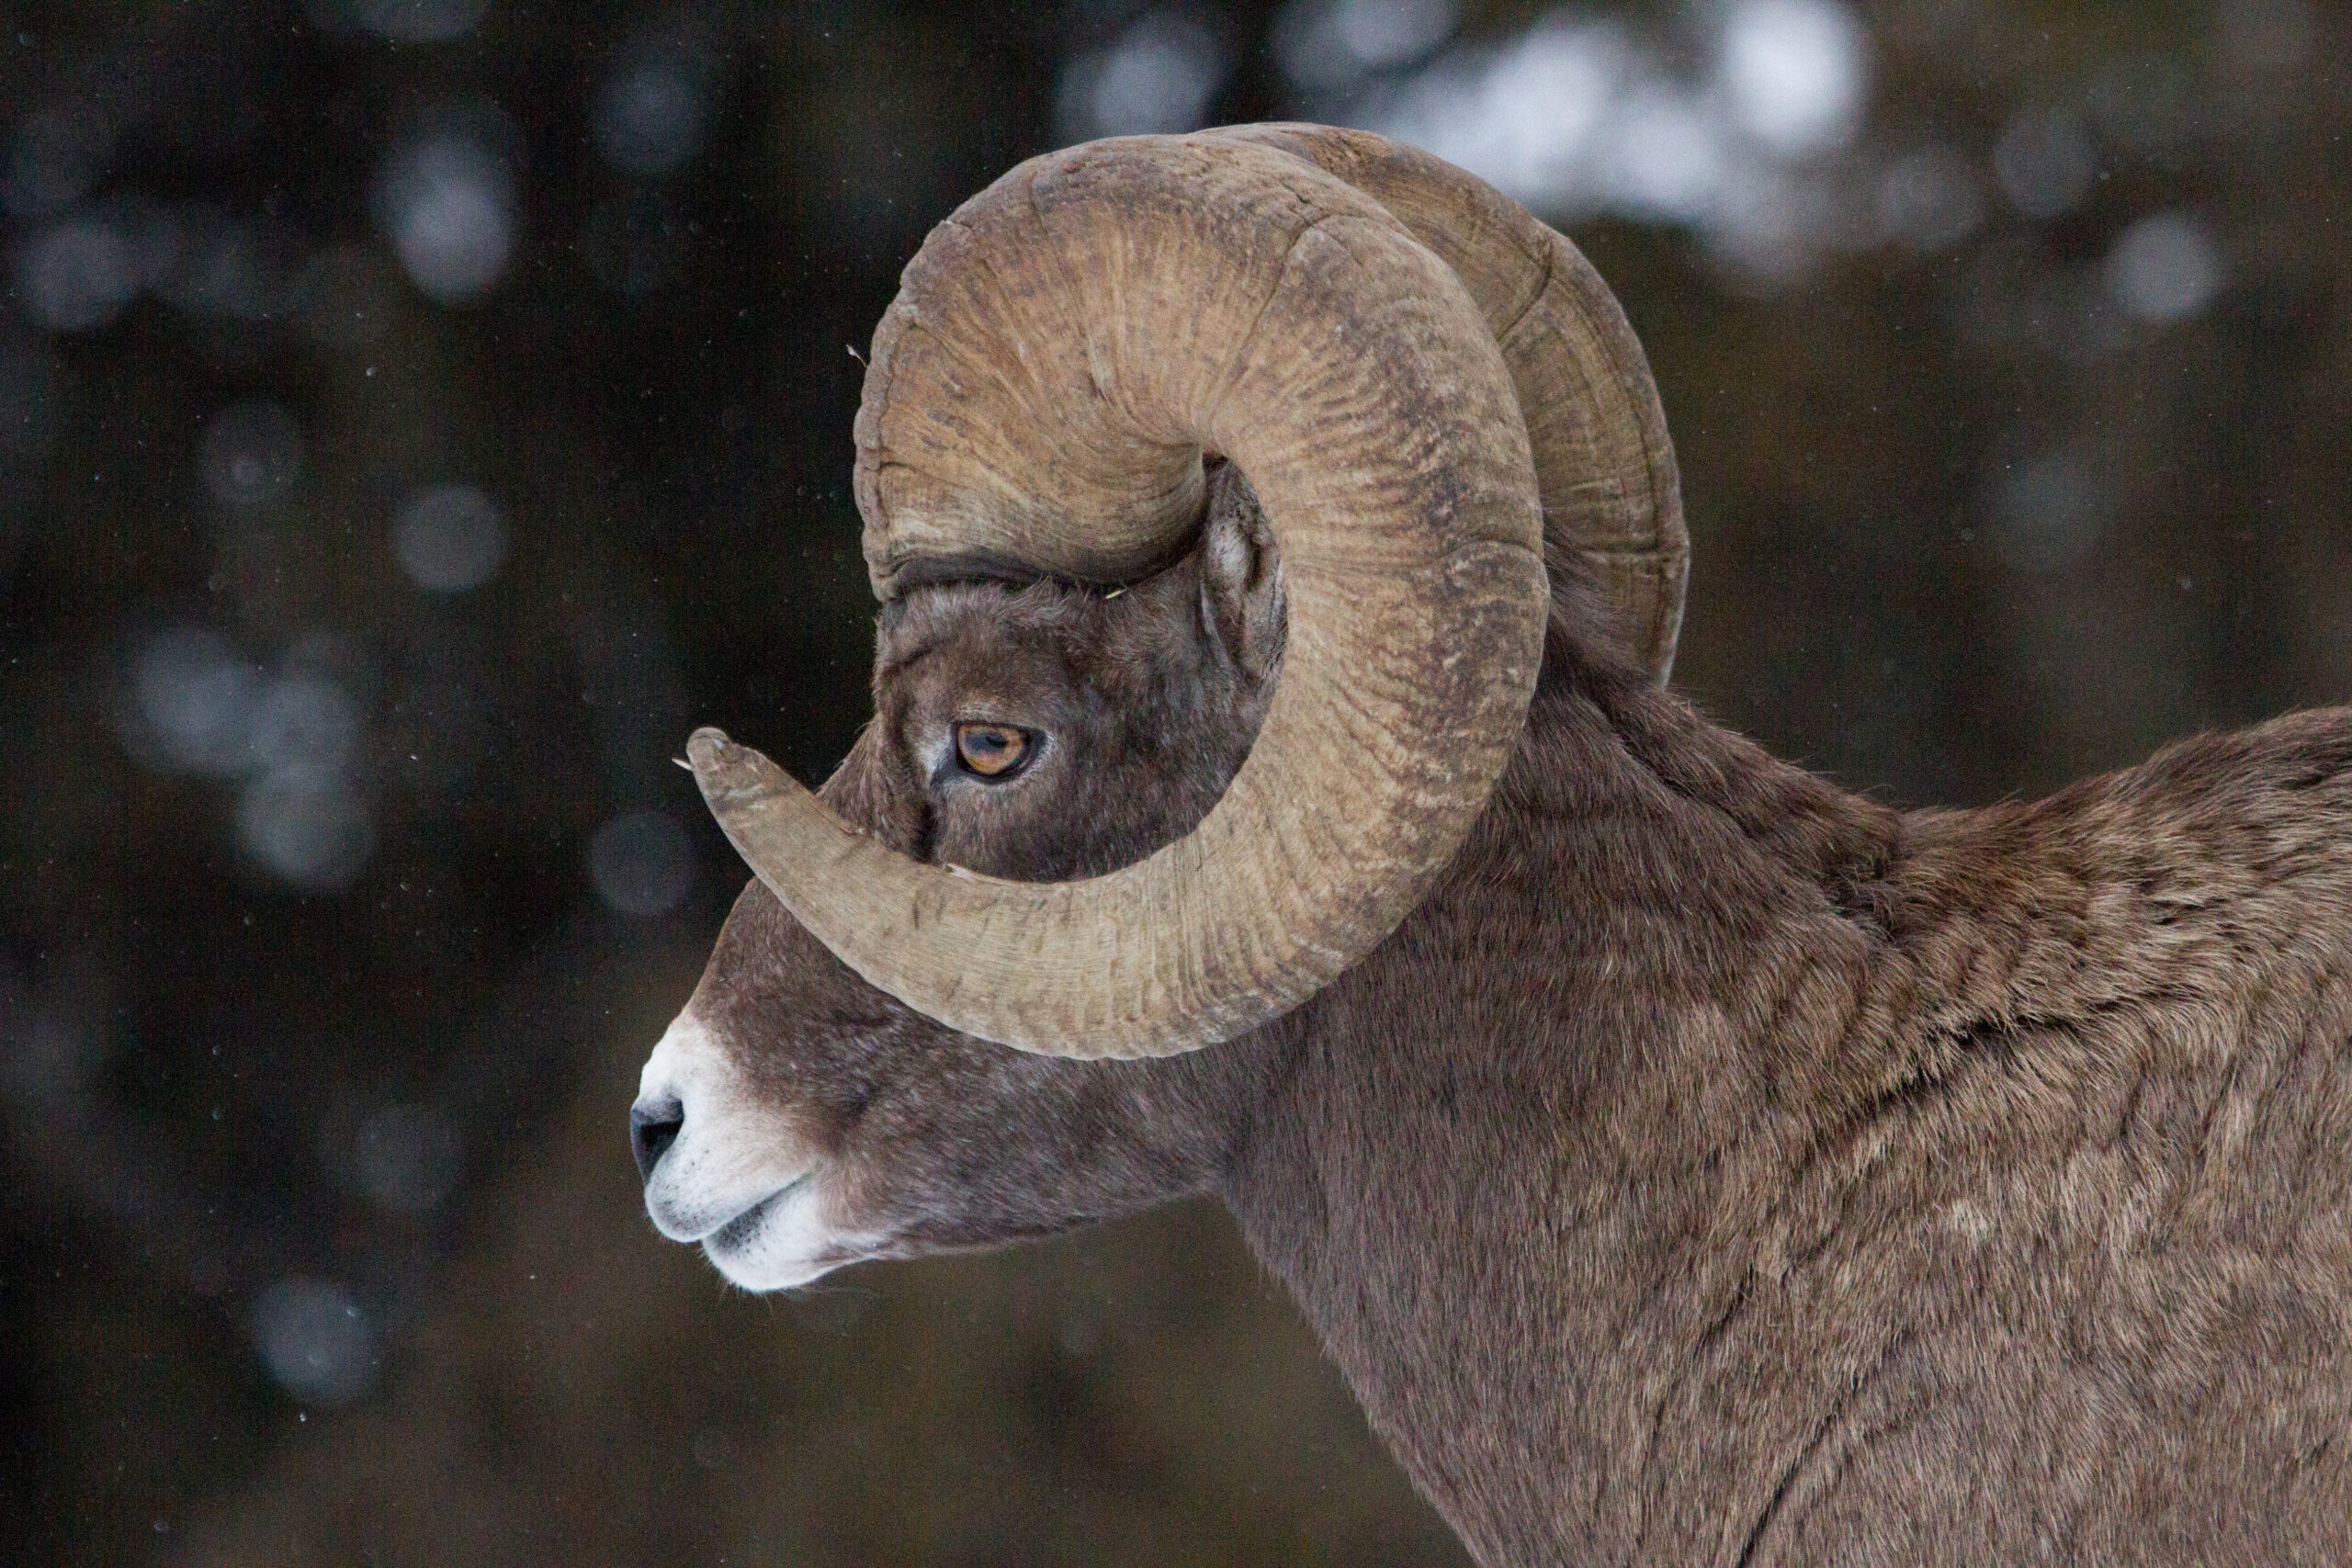 A bighorn sheep nursery is being planned for a private ranch in Utah.